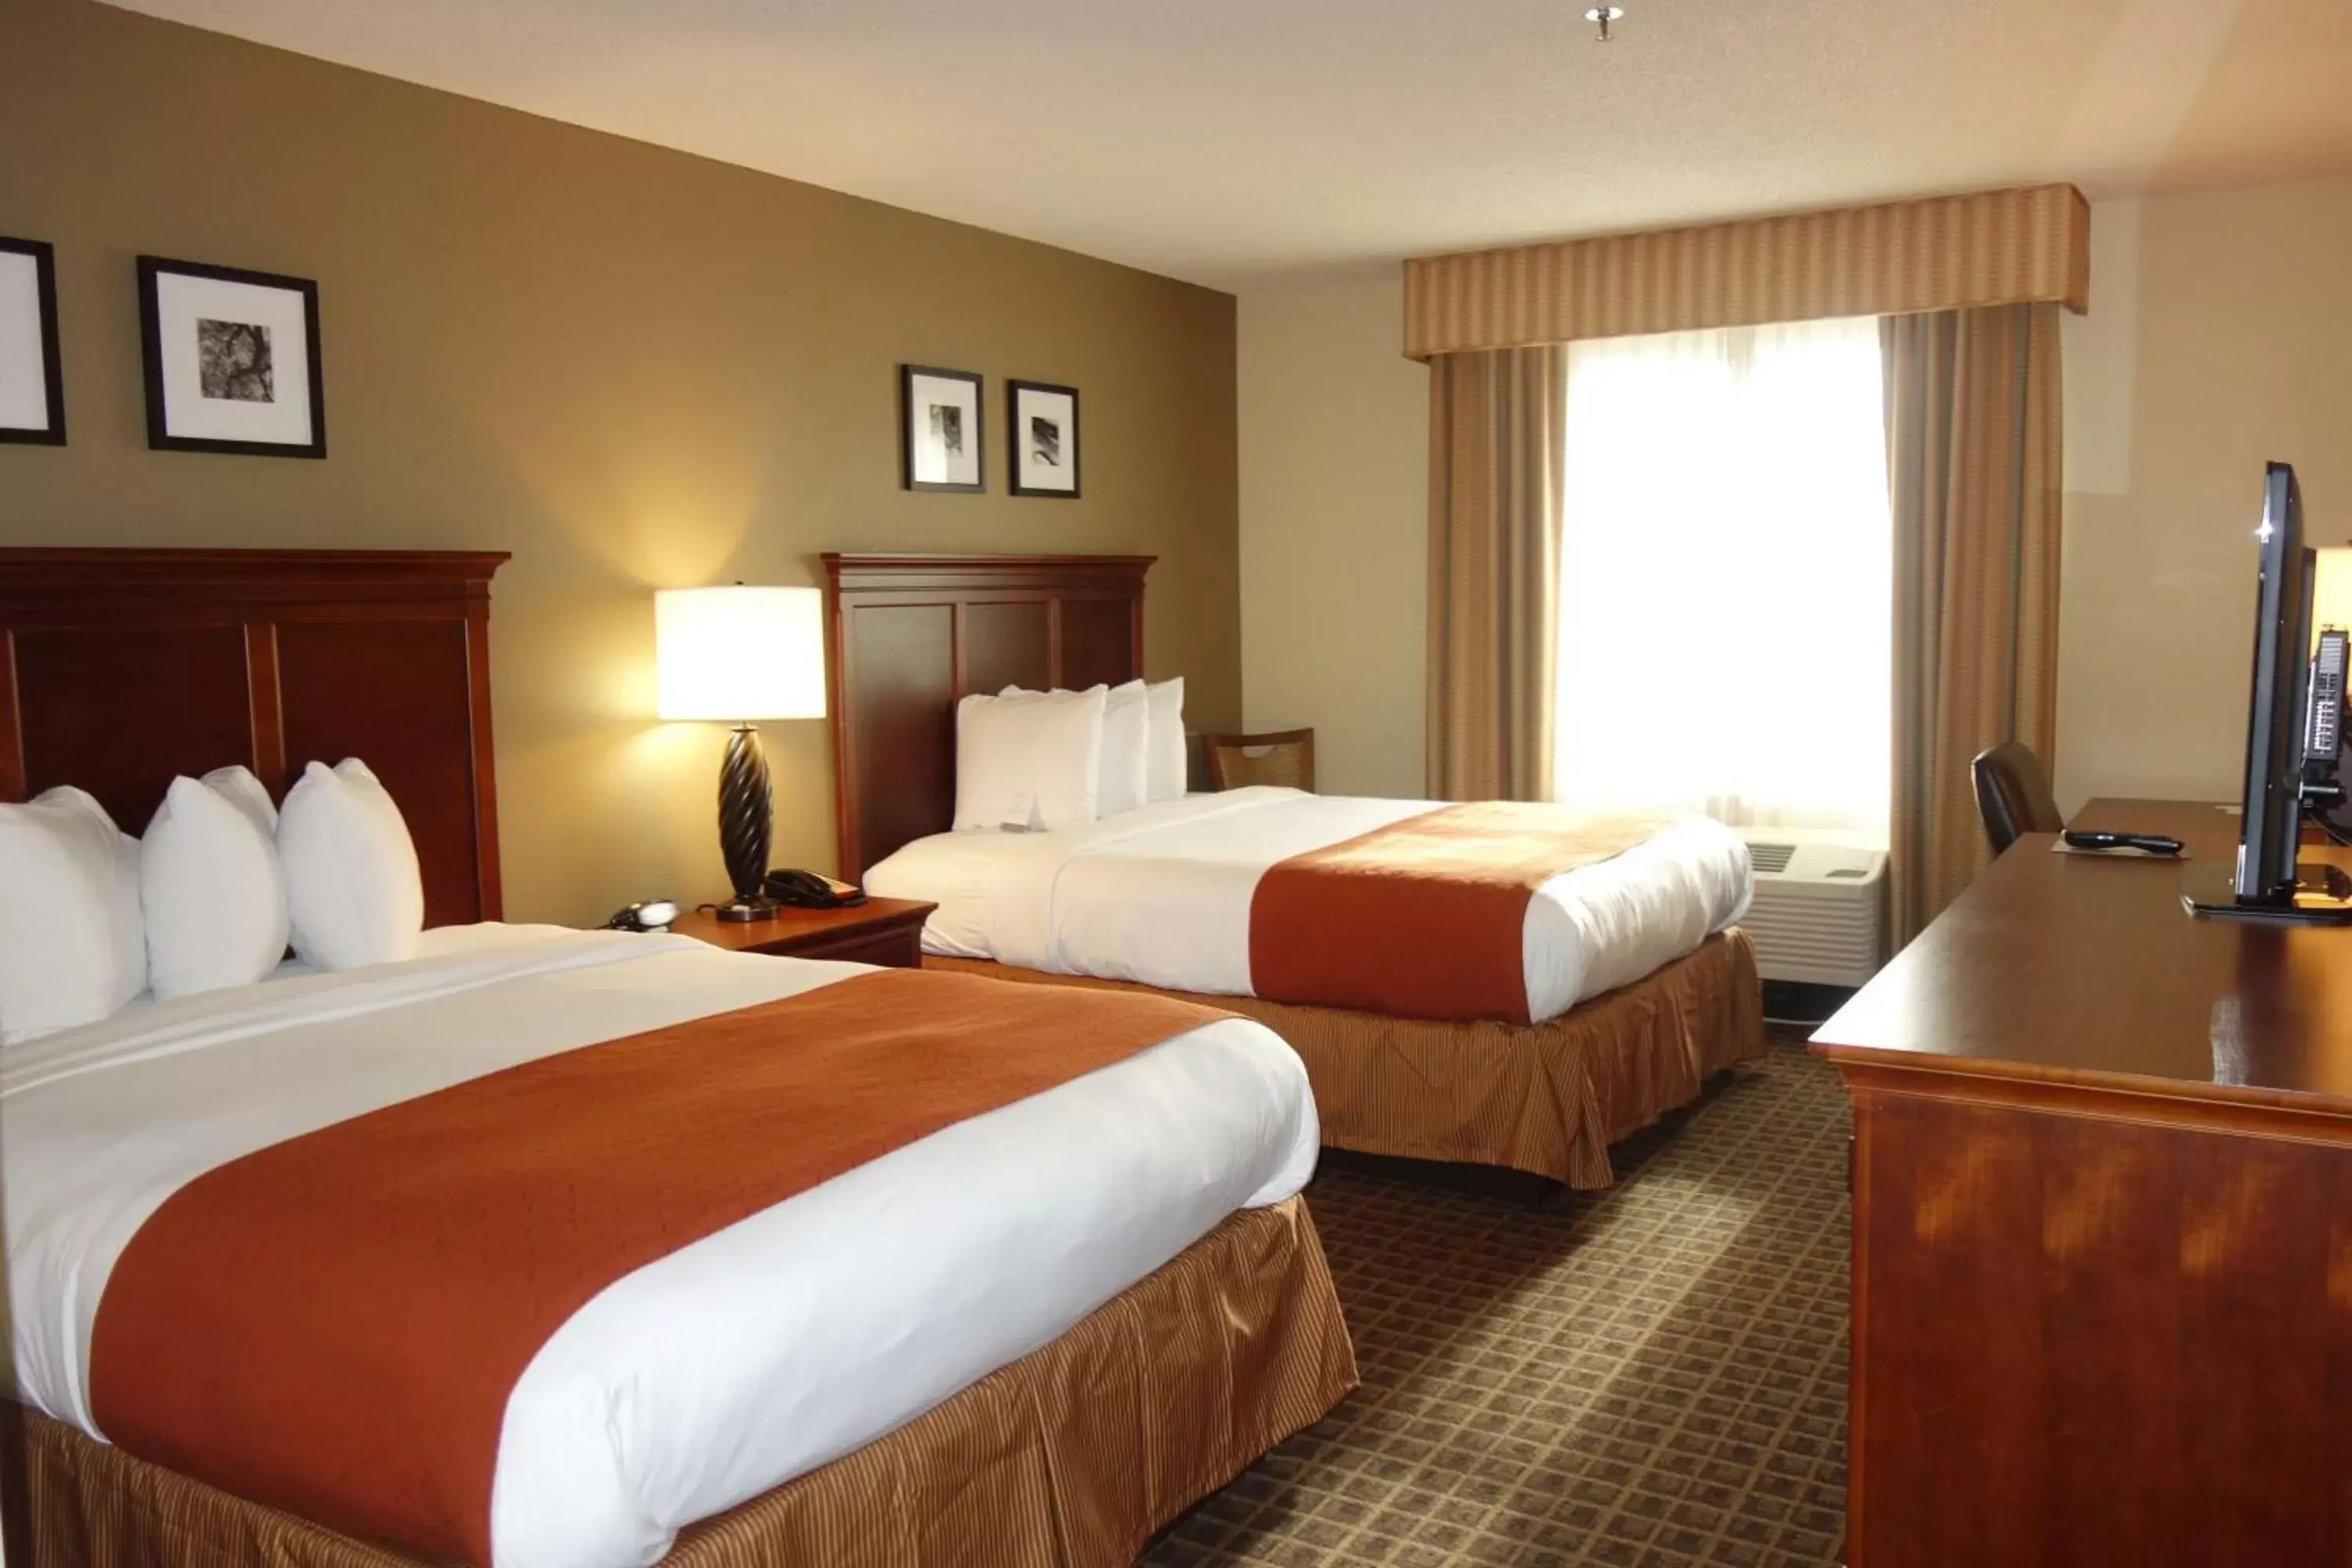 On site, Bed in Country Inn & Suites by Radisson, Lawrenceville, GA